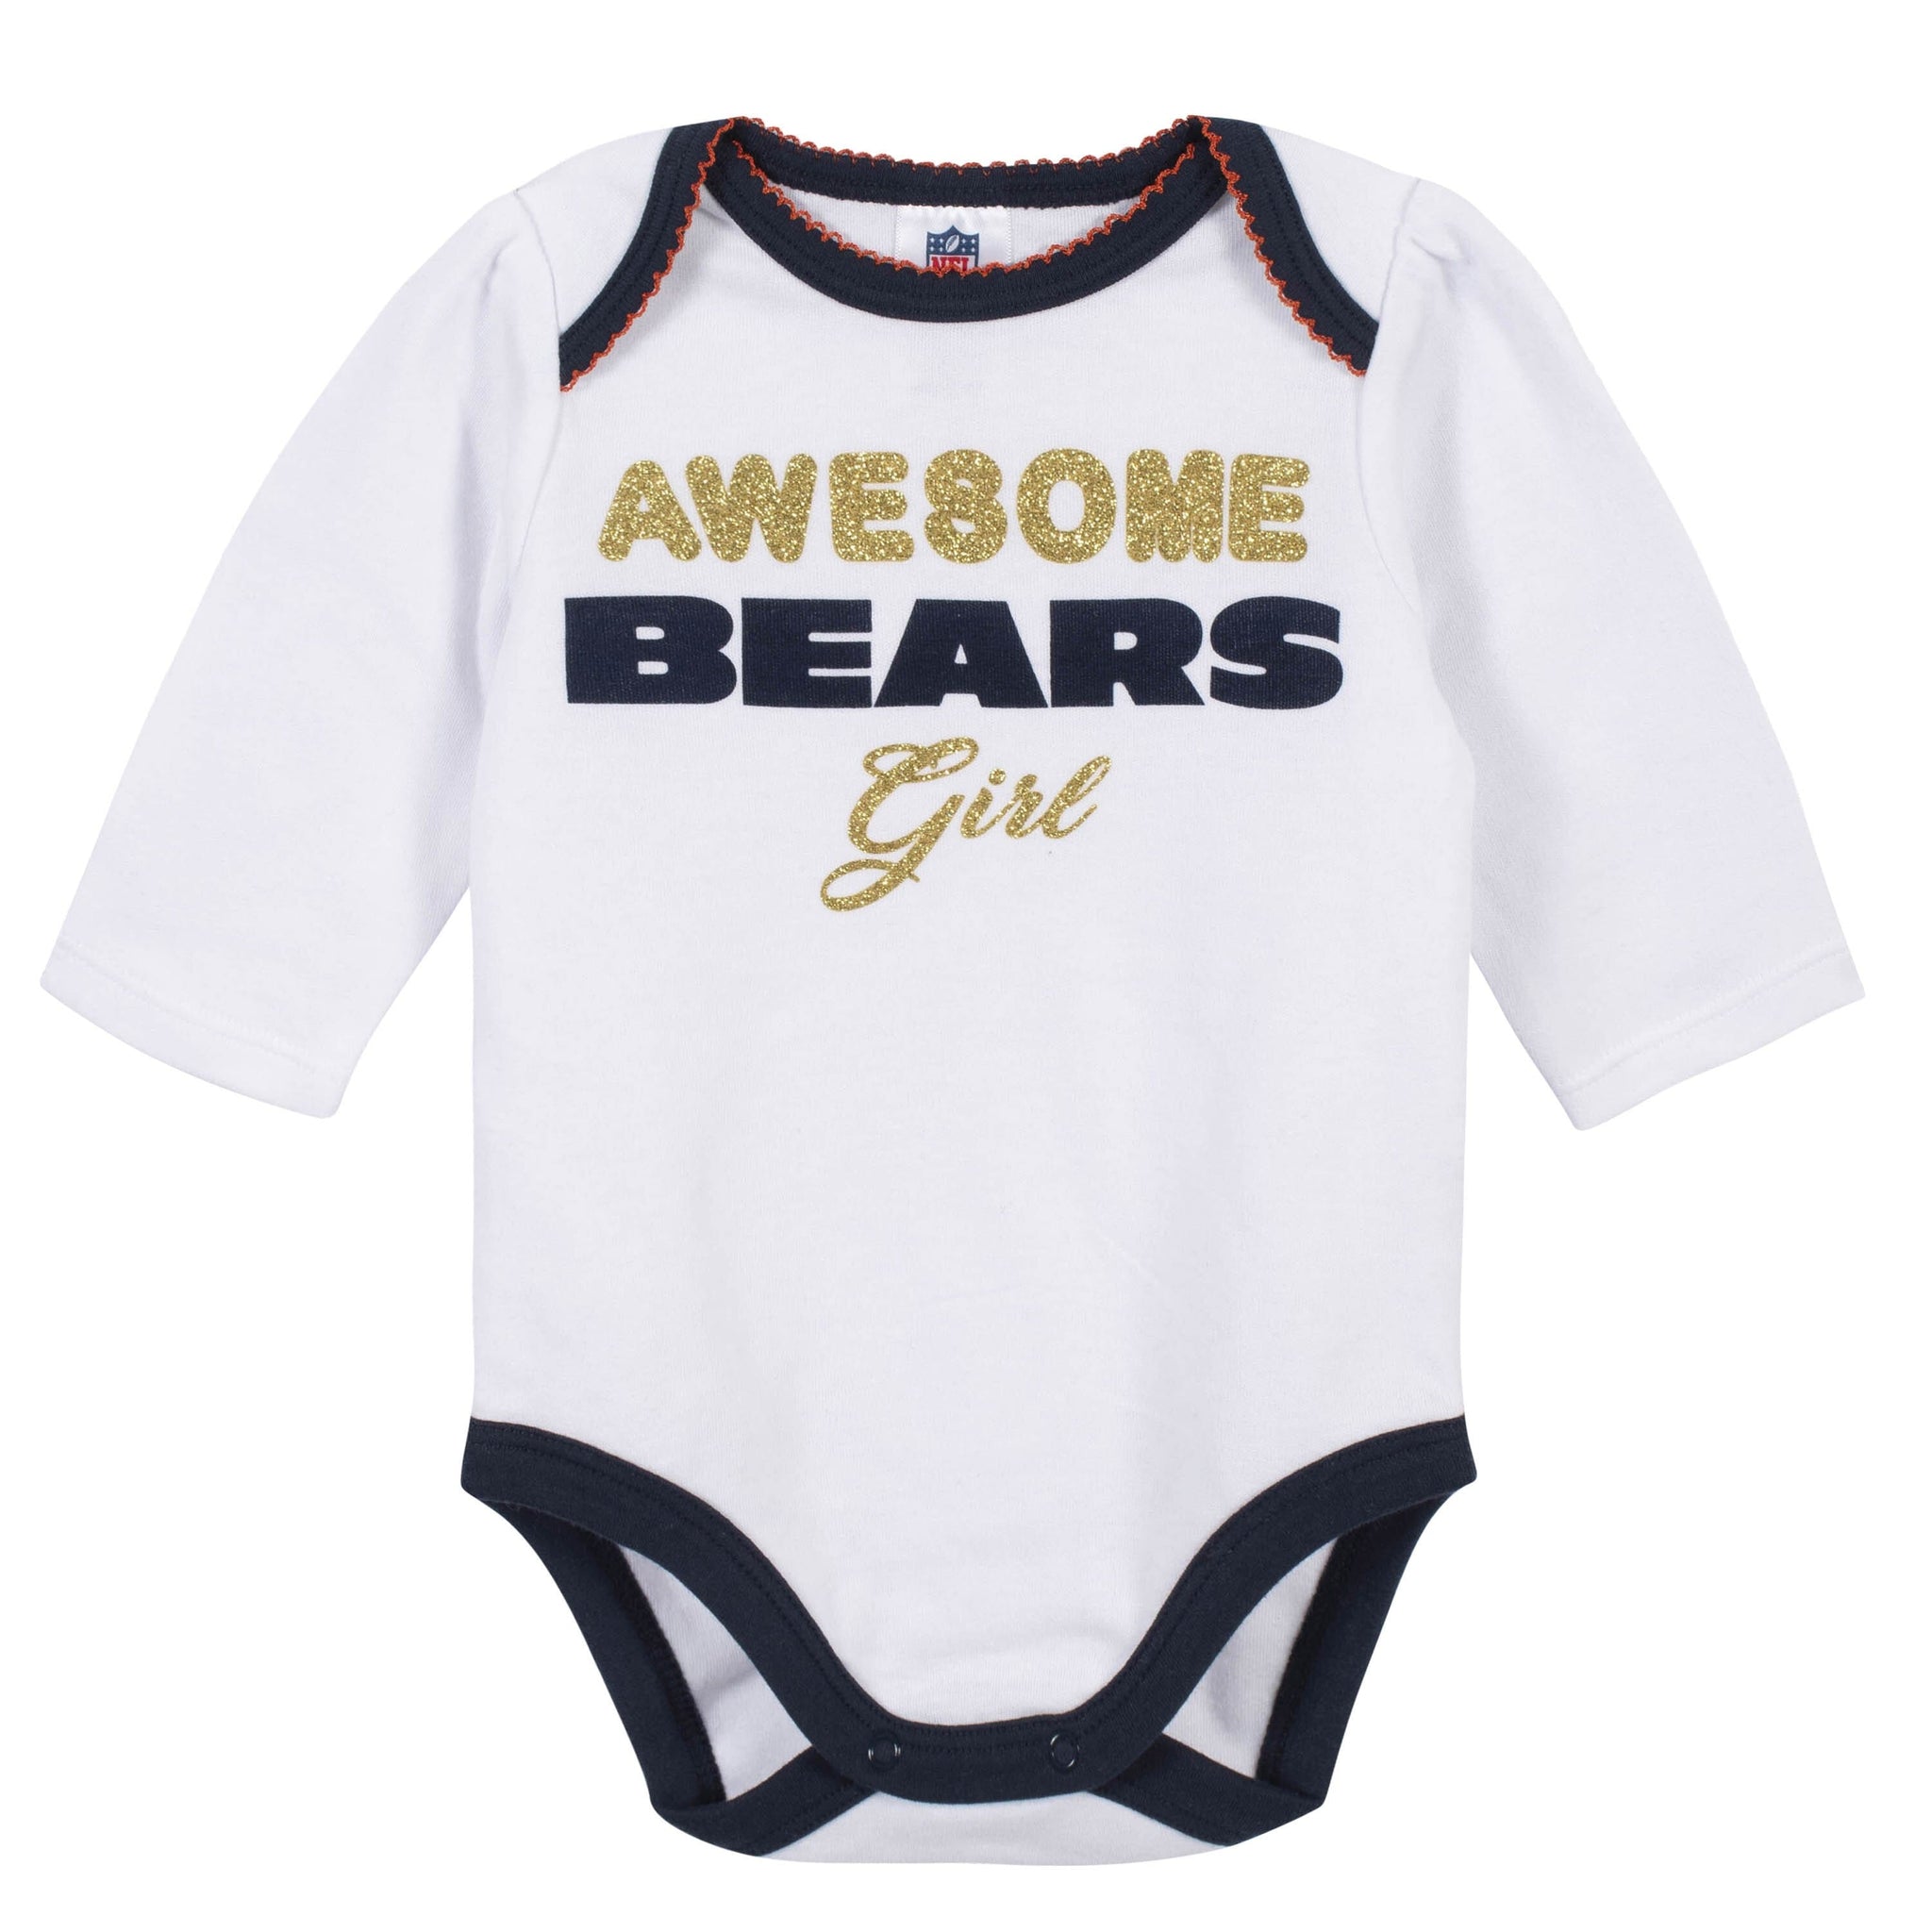 chicago bears infant jersey